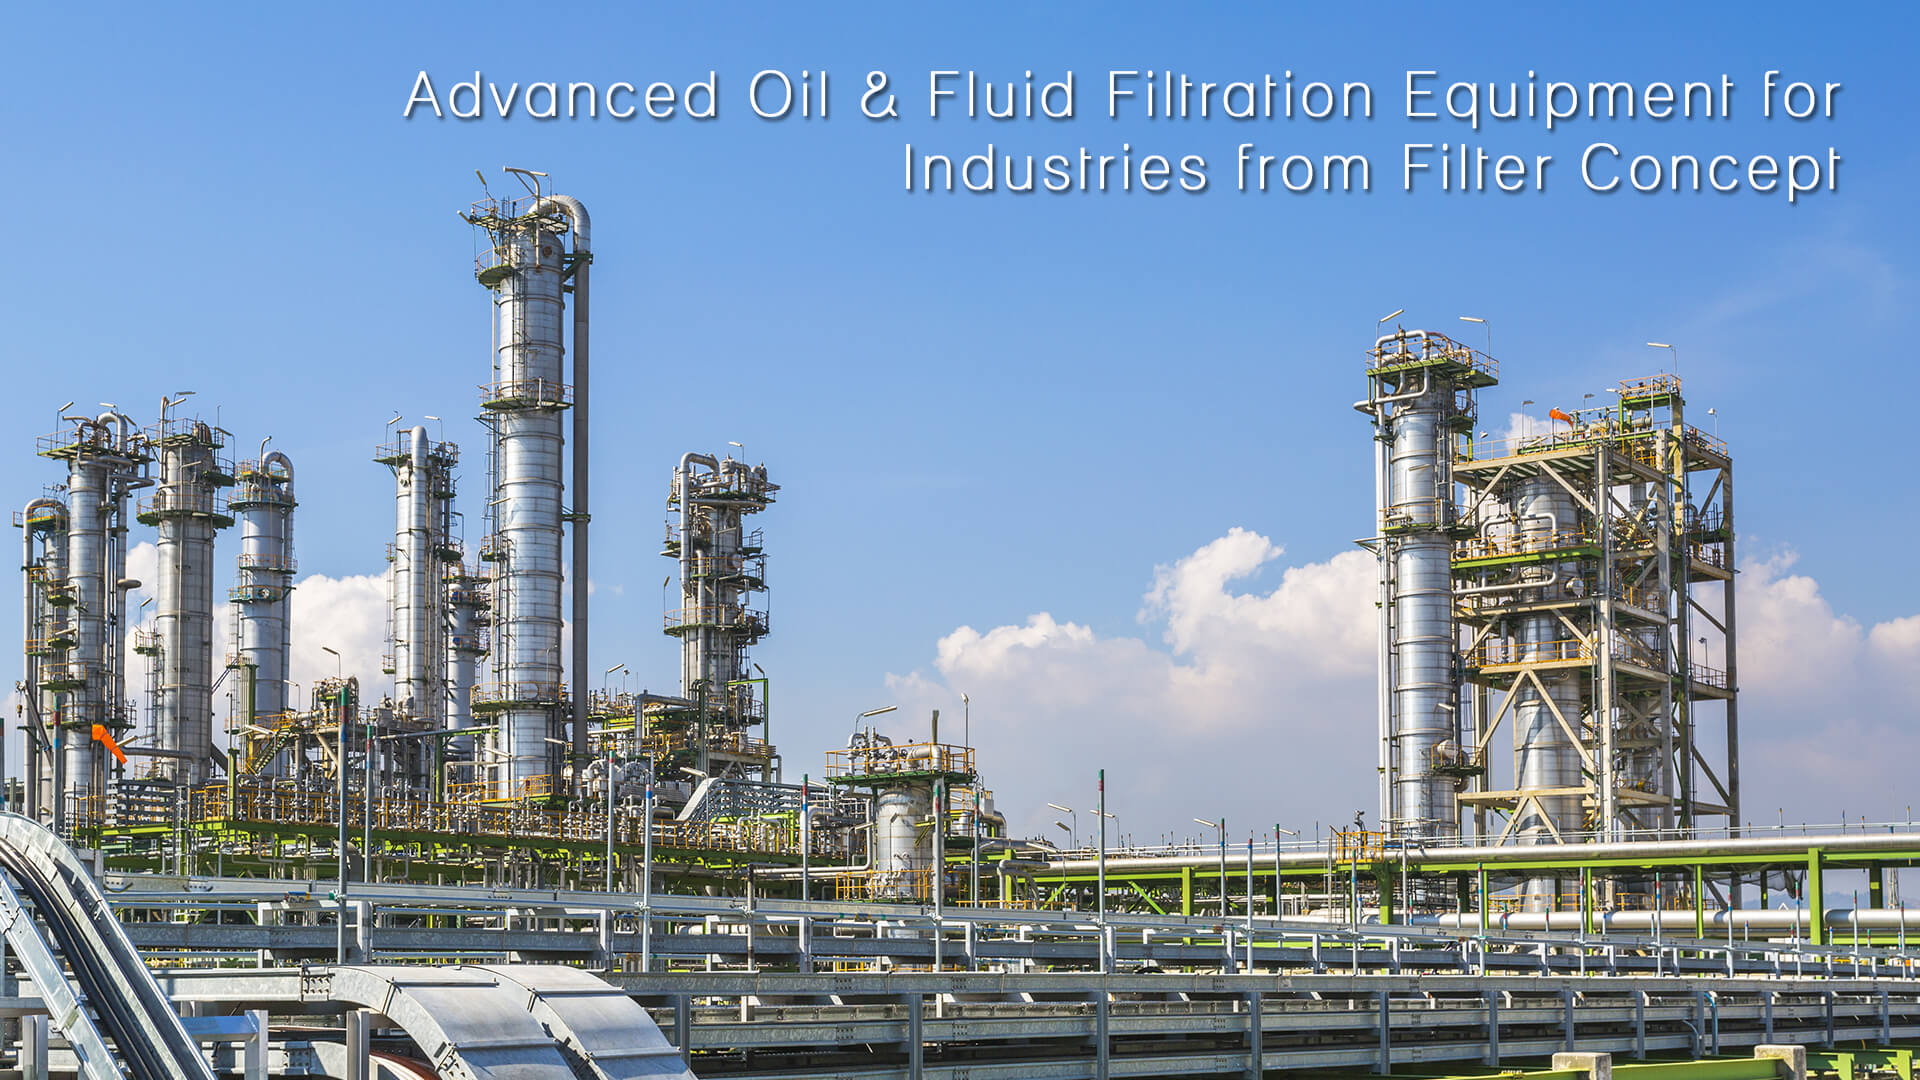 Advanced Oil & Fluid Filtration Equipment for Industries from Filter Concept